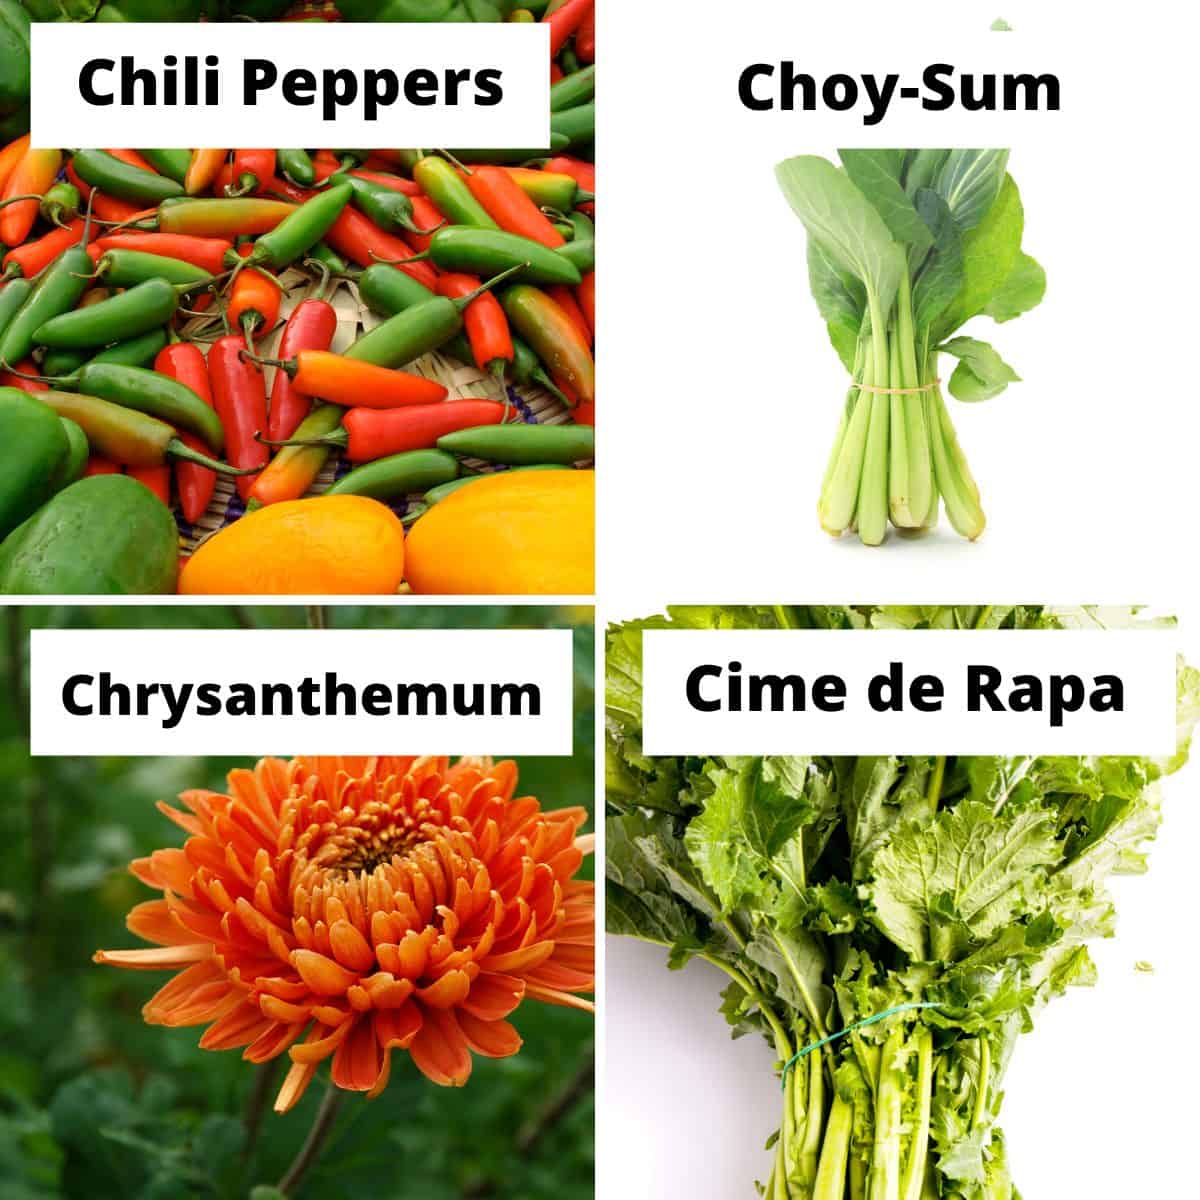 Vegetables that start with C: Chili peppers, choy-sum, chrysanthemum, cime de rapa.